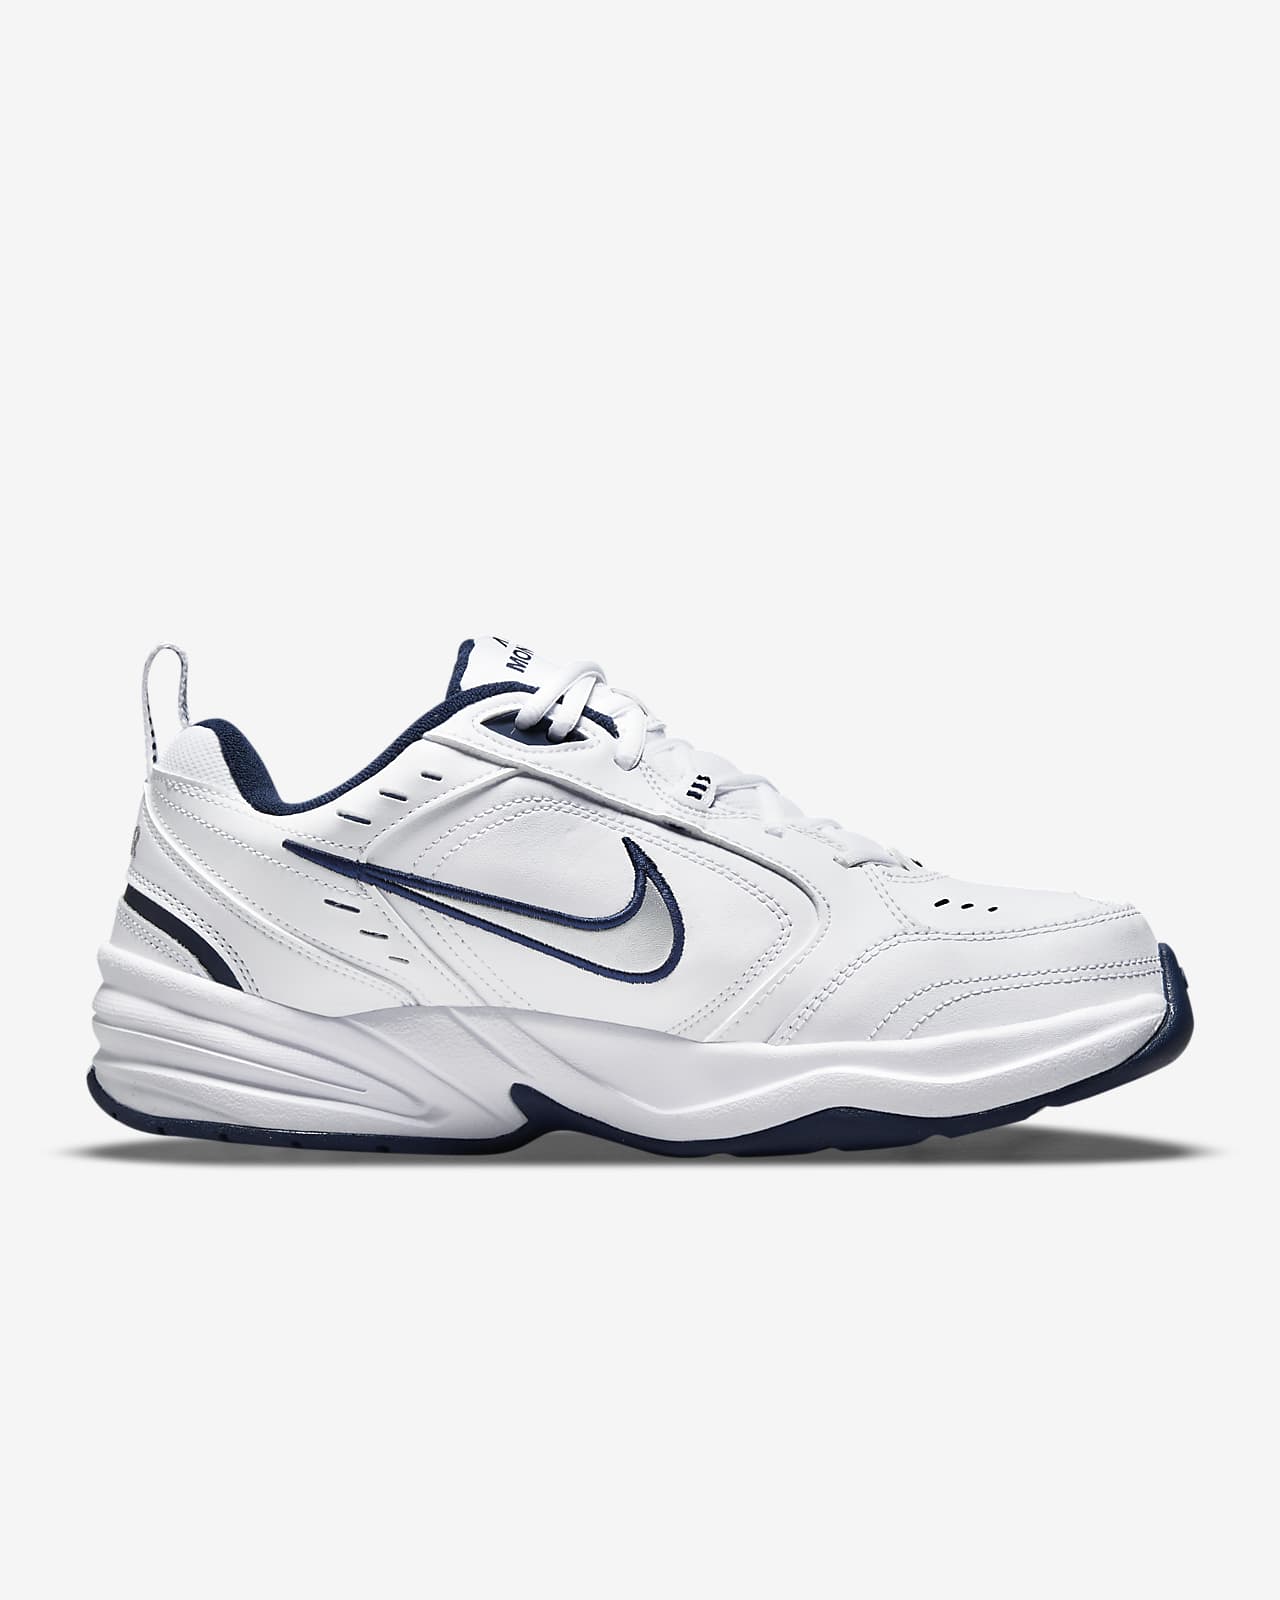 Nike Air Monarch IV Workout Shoes (Extra Wide). Nike.com